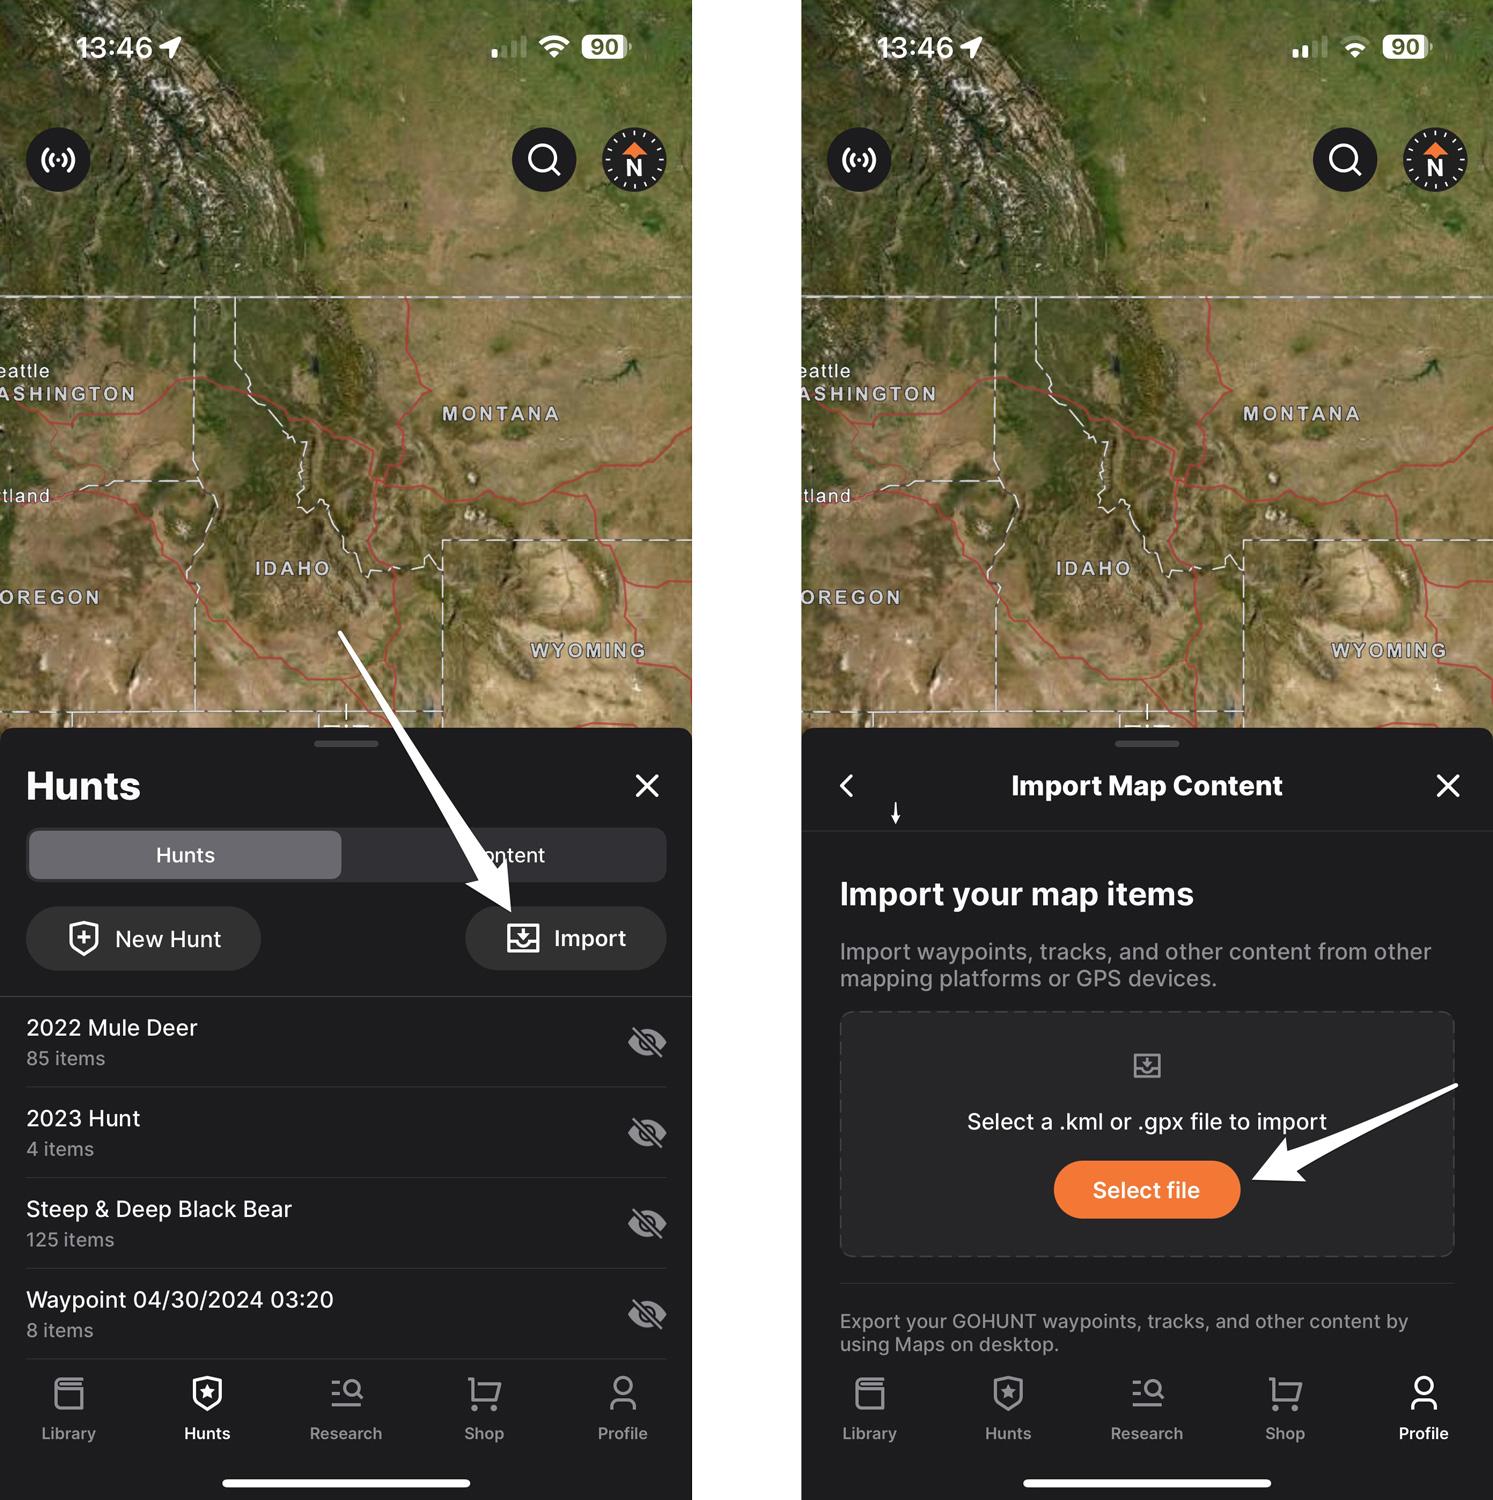 How to import waypoints to GOHUNT Maps mobile app